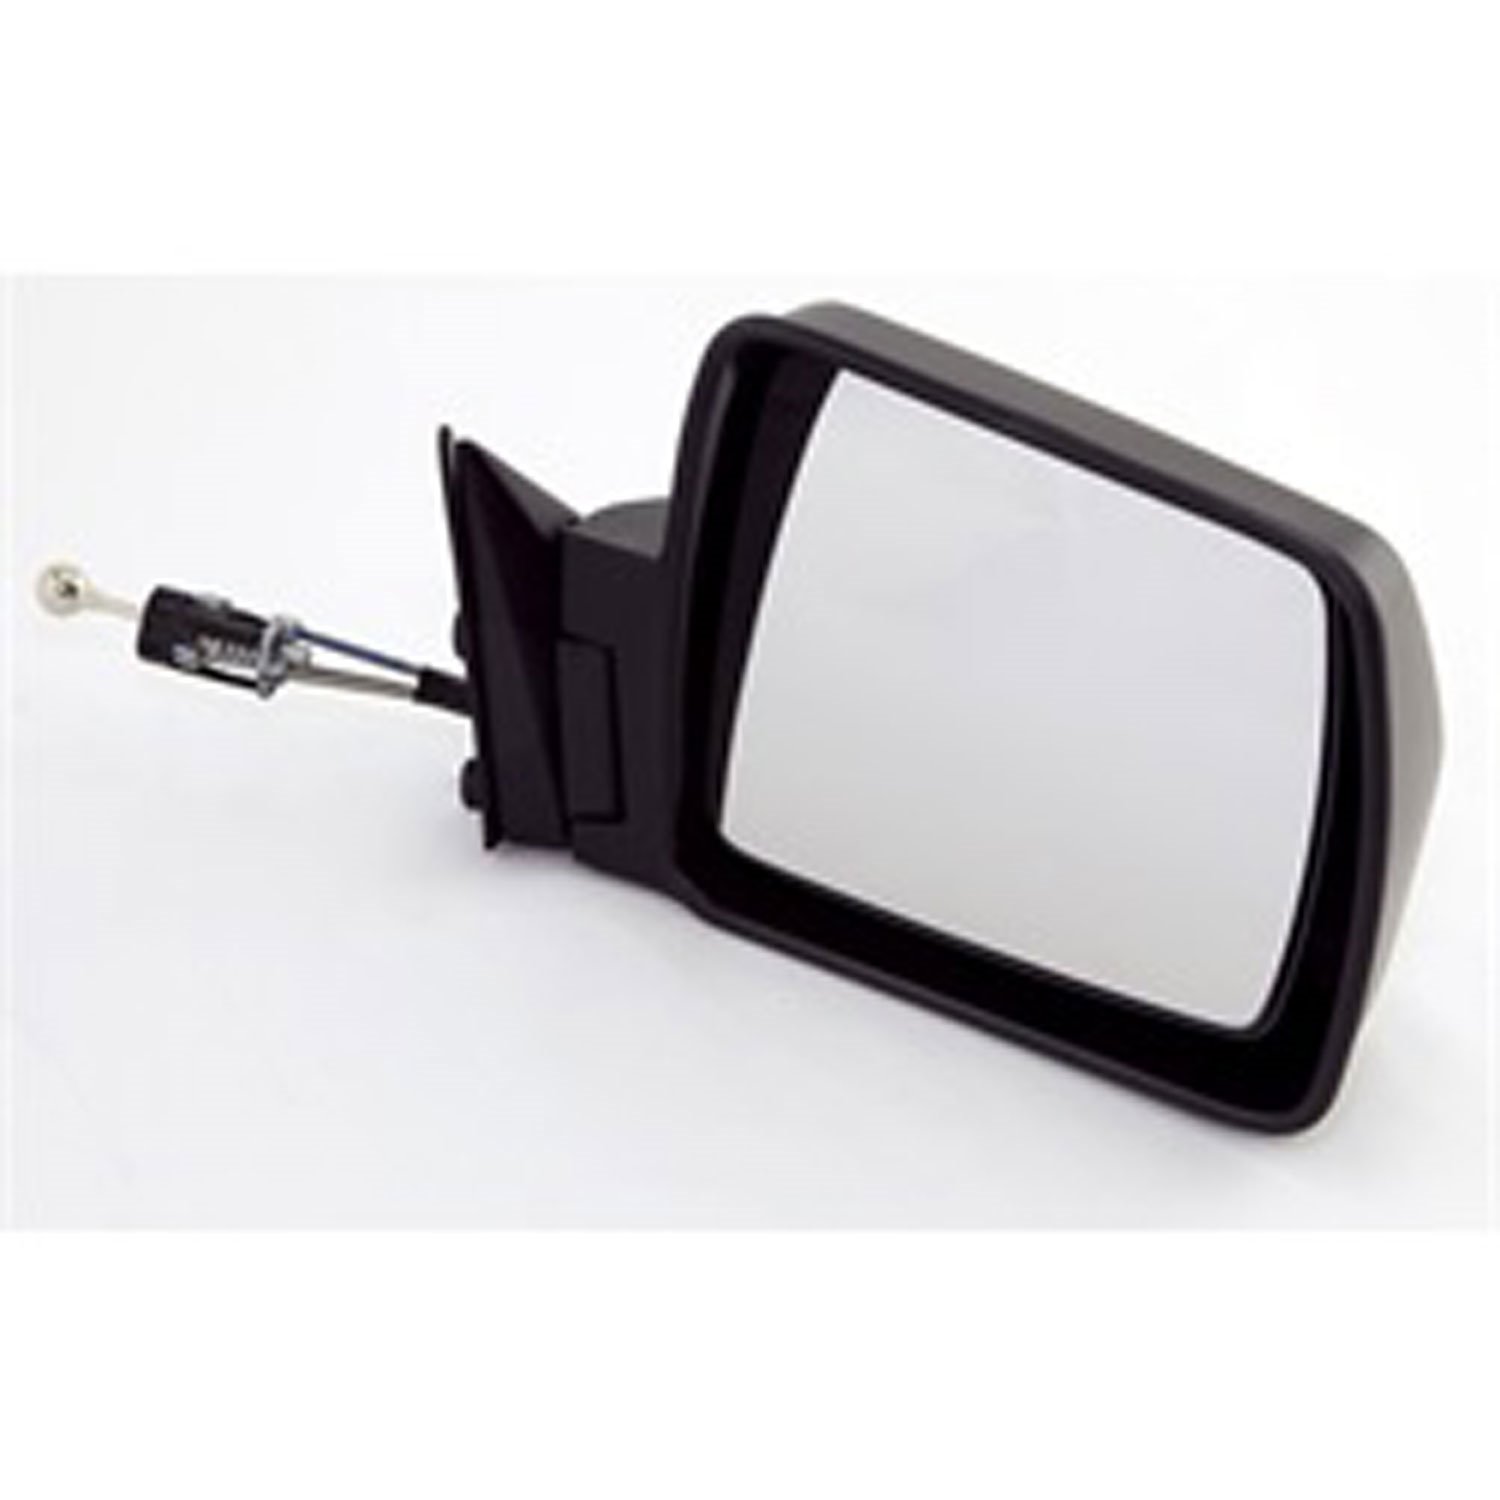 This black folding door mirror from Omix-ADA fits the right door on 84-96 Jeep Cherokee XJ. Connects